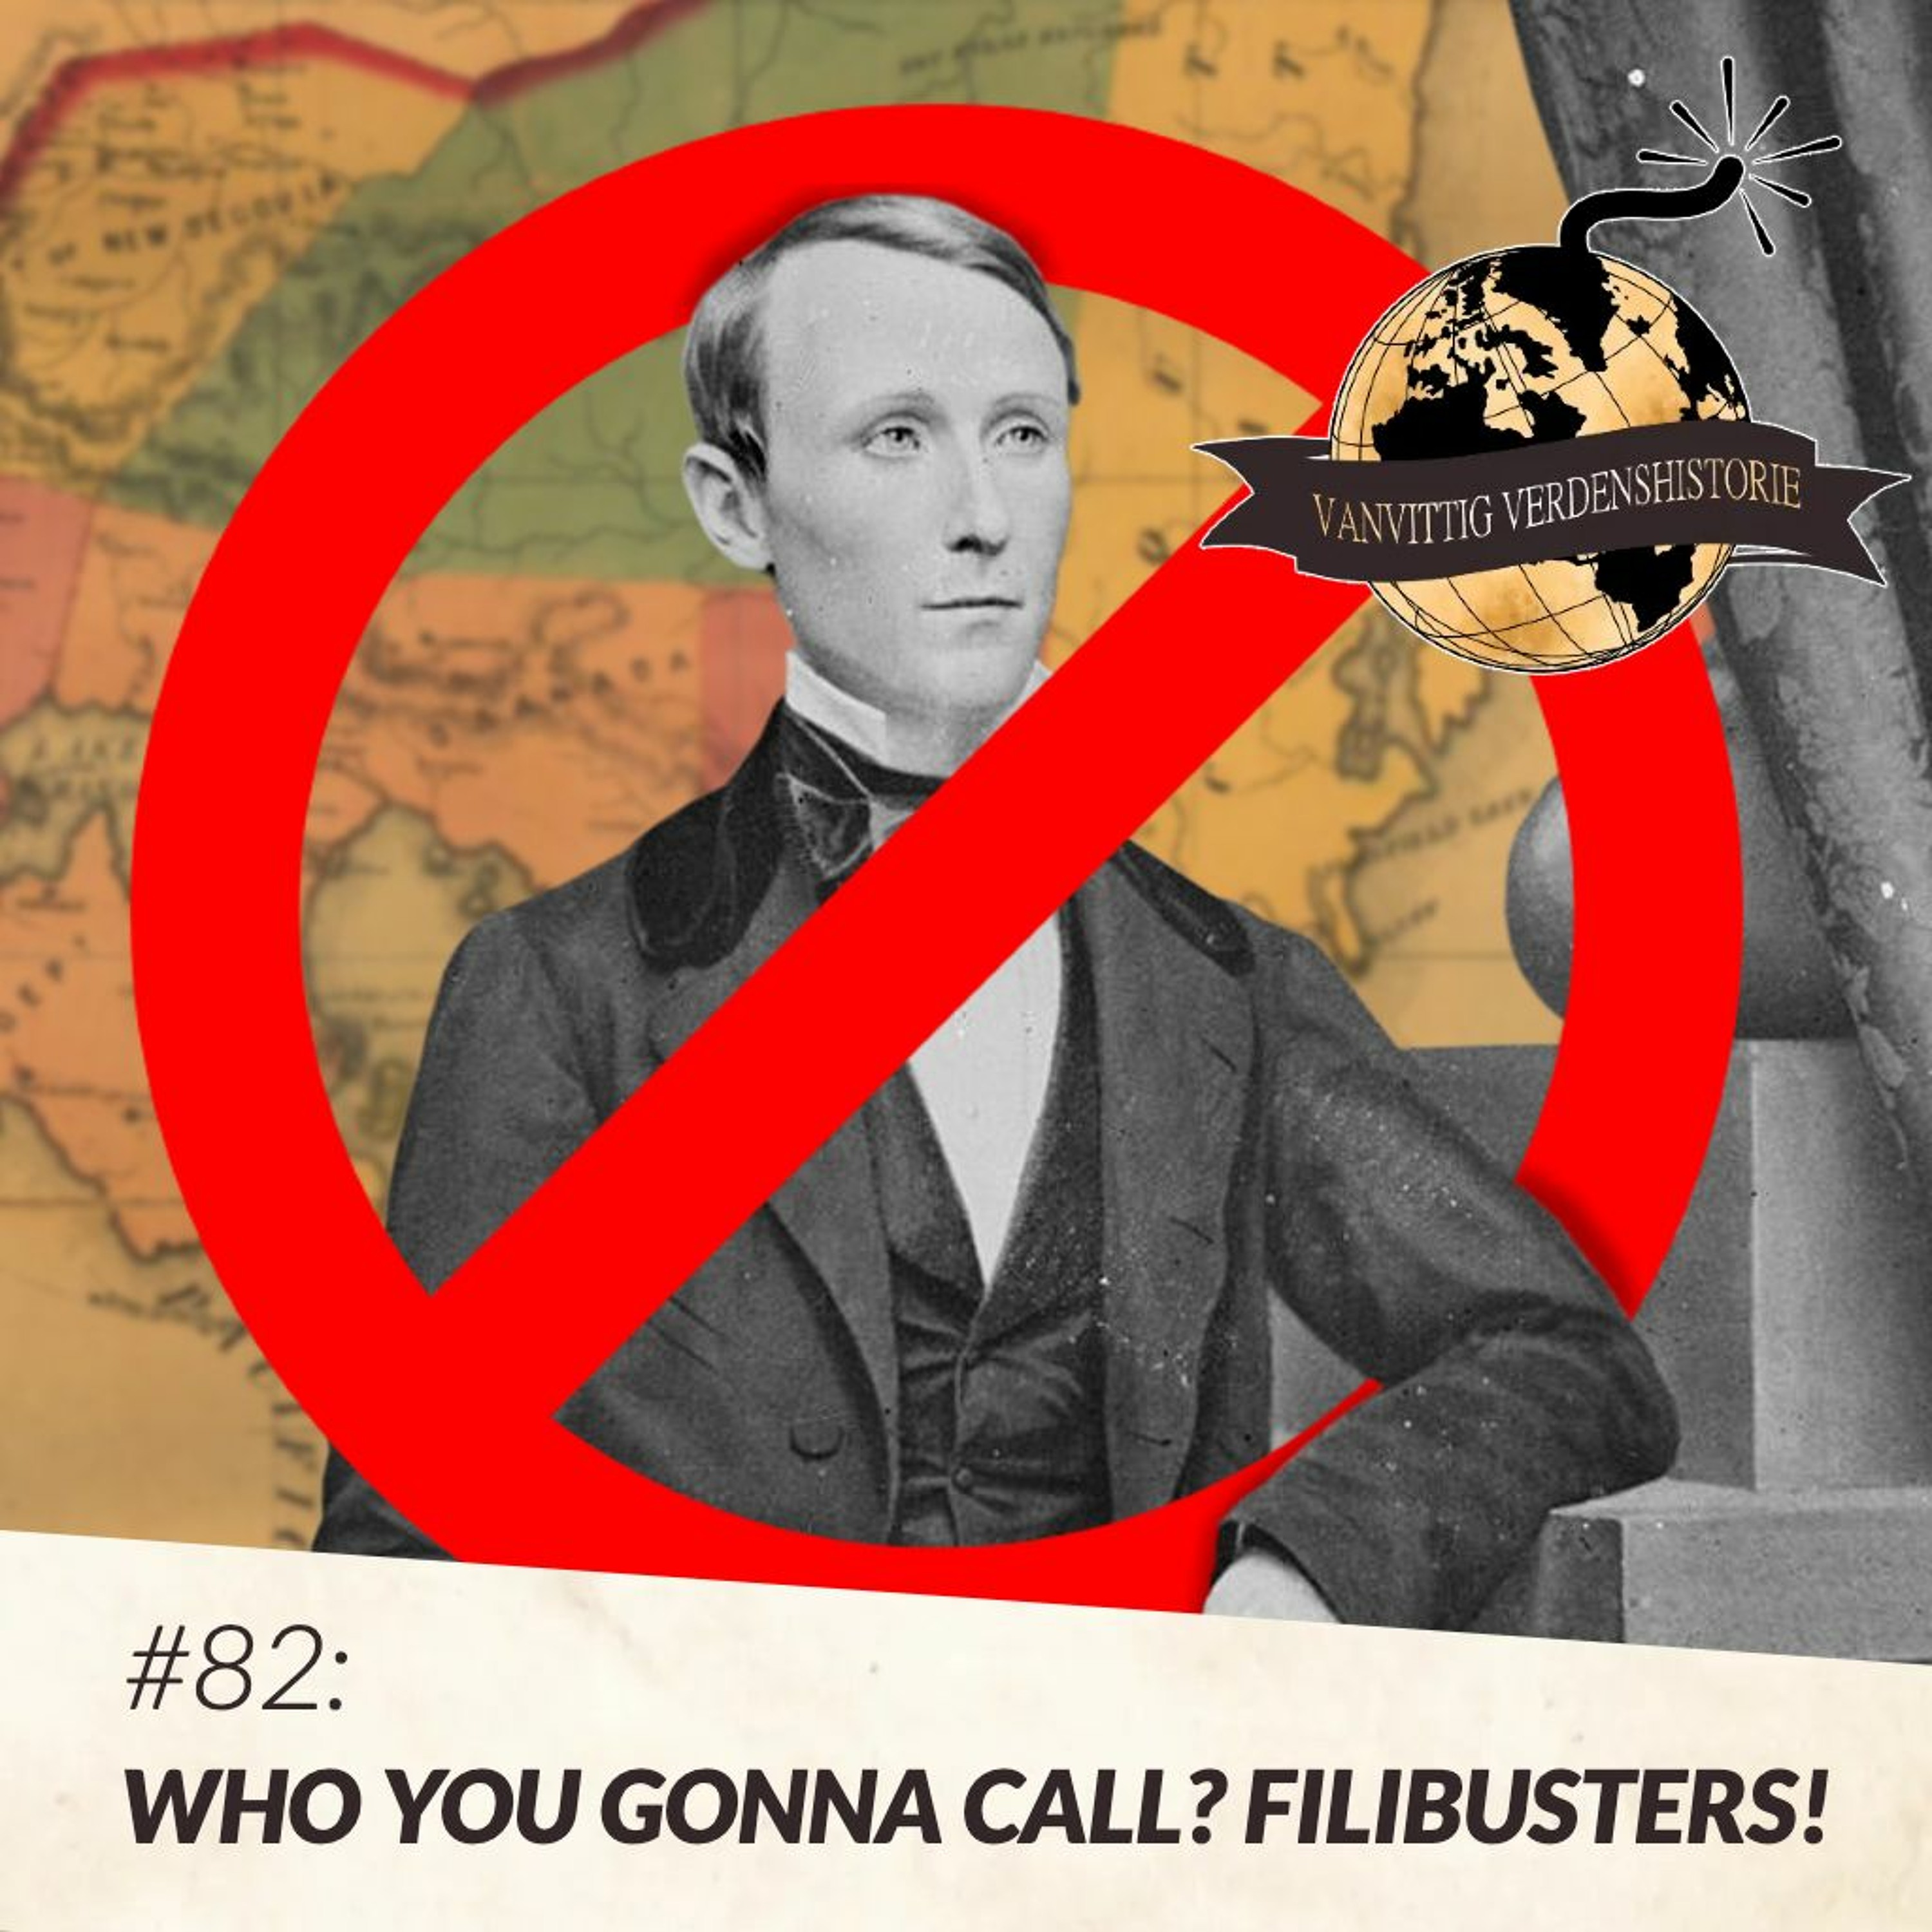 #82: Who you gonna call? Filibusters!